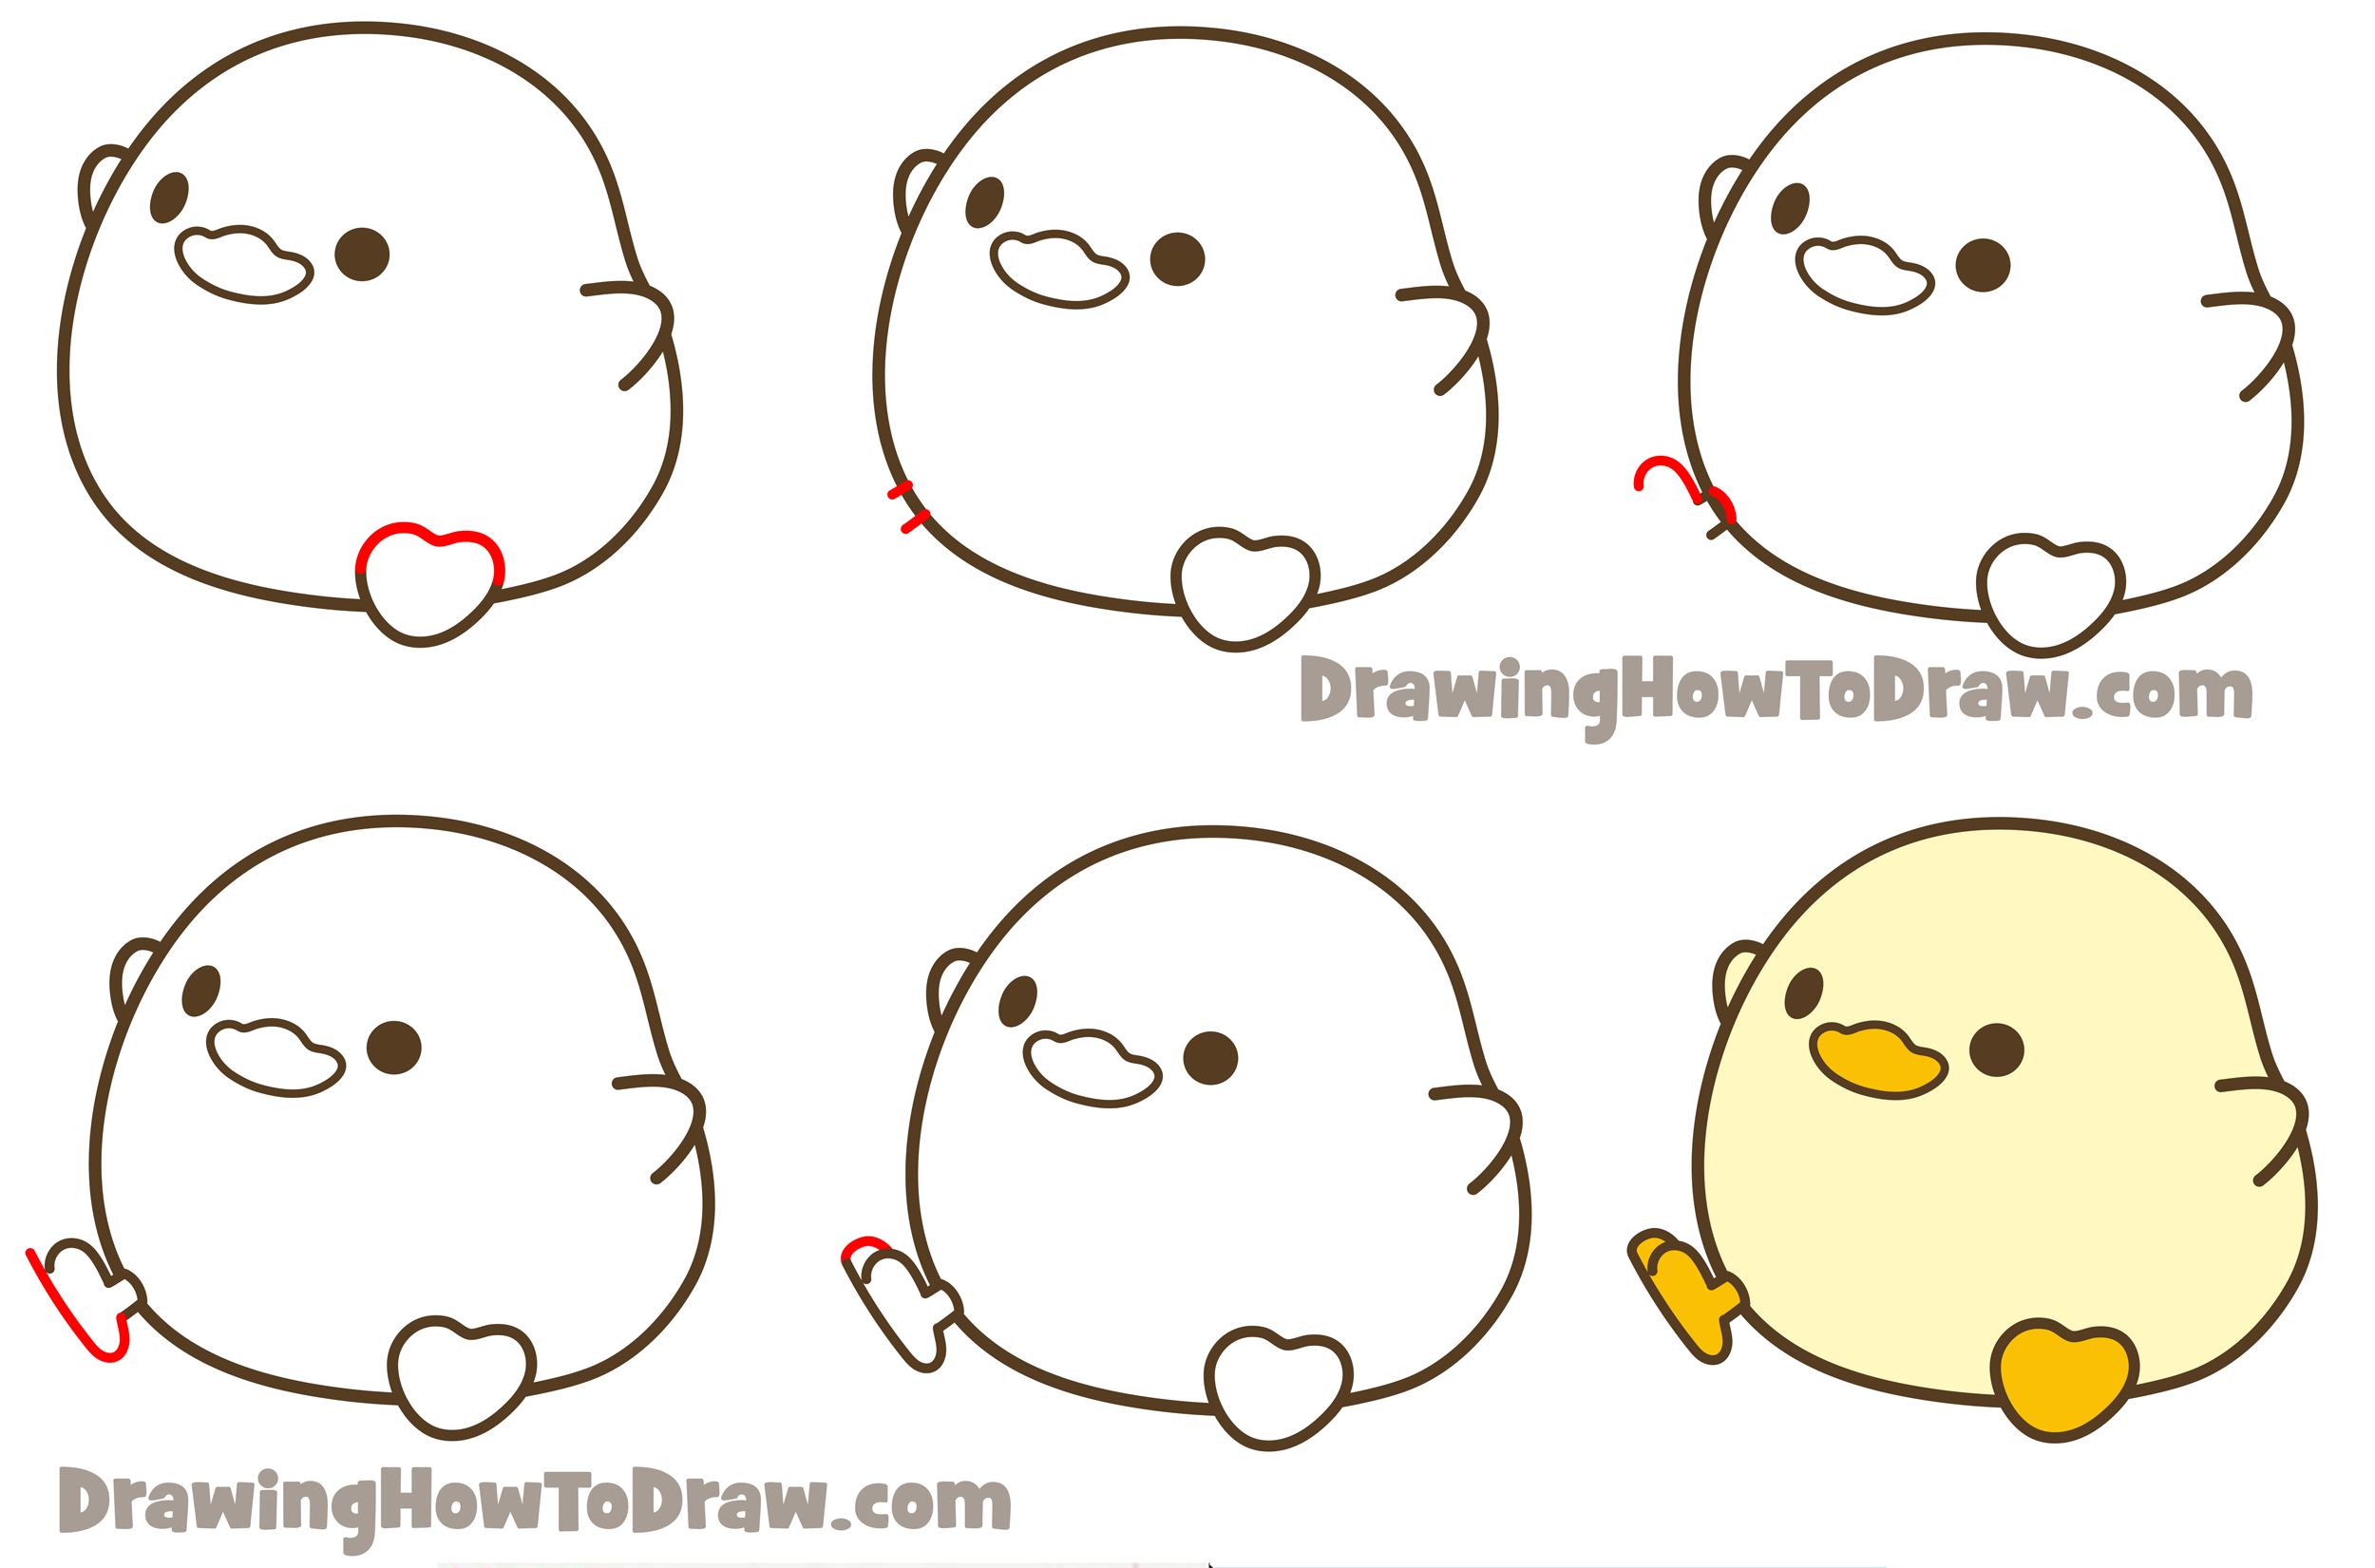 Duck drawing easy | Duck drawing, Cool drawings, Easy drawings-saigonsouth.com.vn